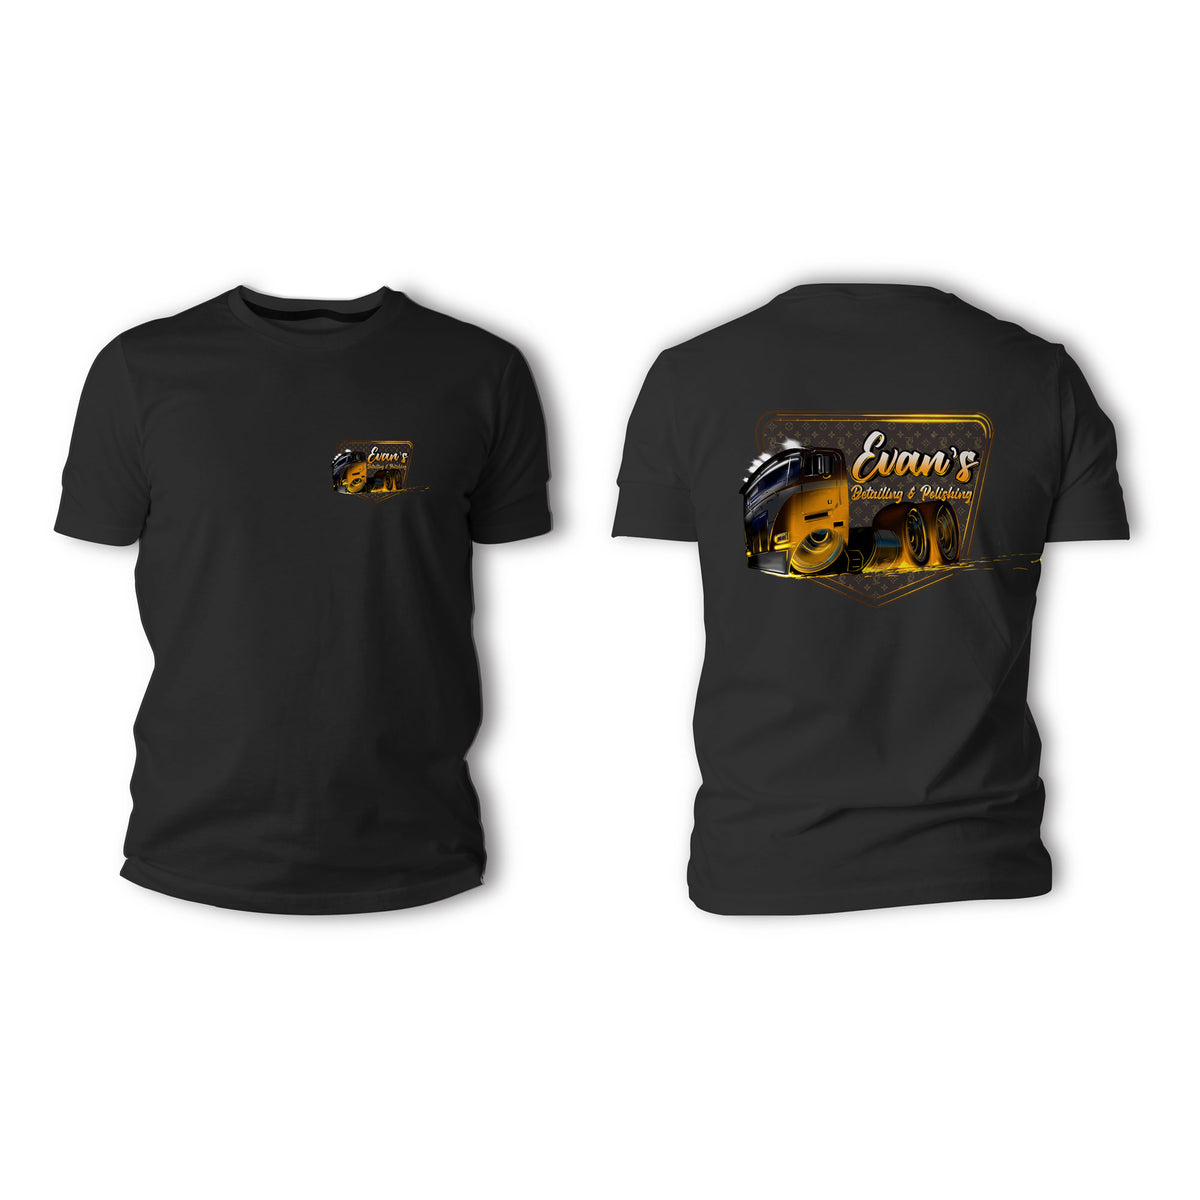 Nighttime Louisville Louis Shirts and Hoodies